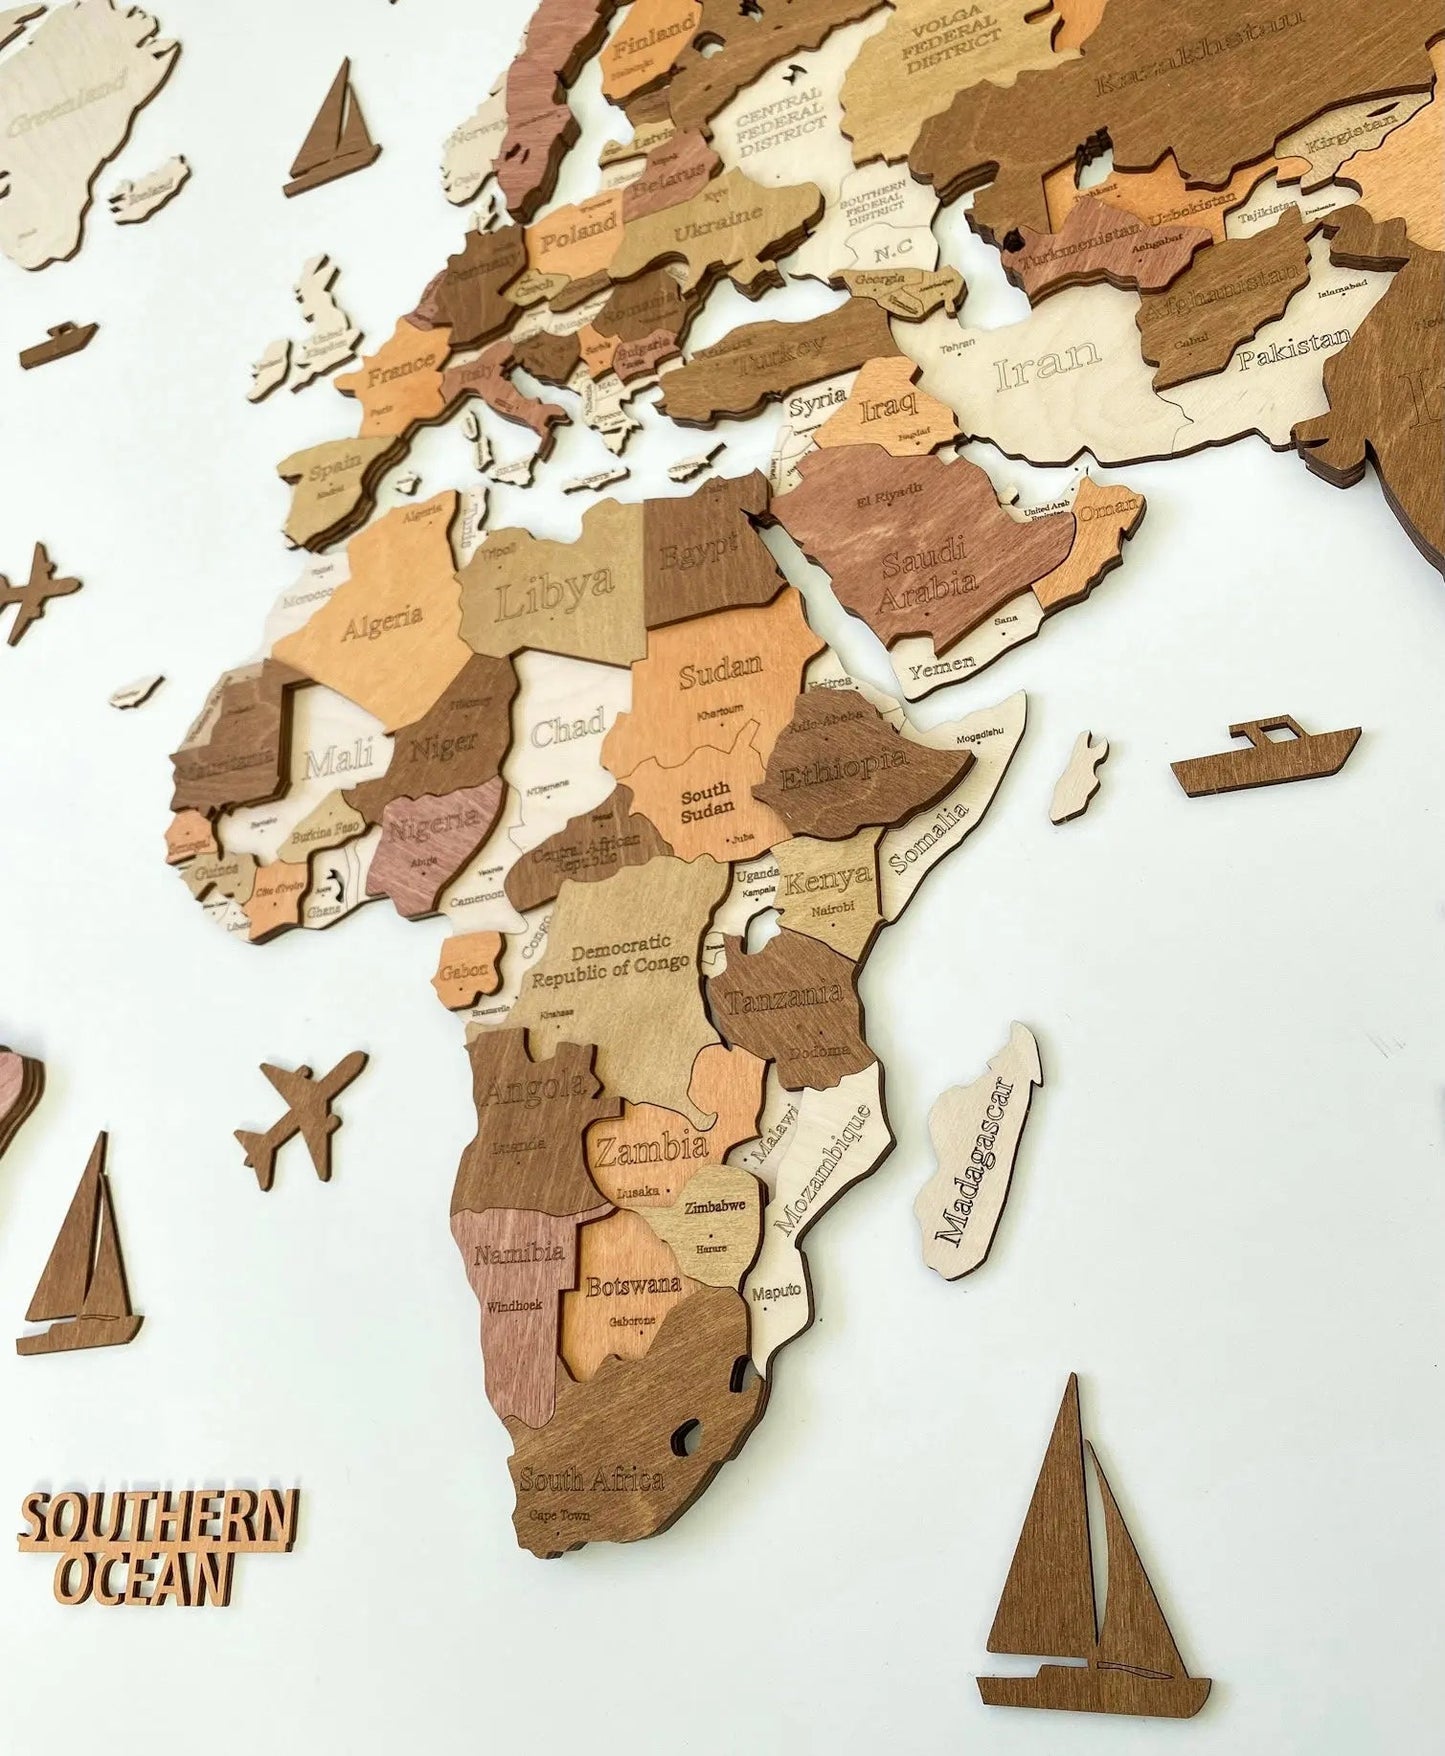 3D WOODEN WALL MAP COLOR “SANDY” WoodLeo